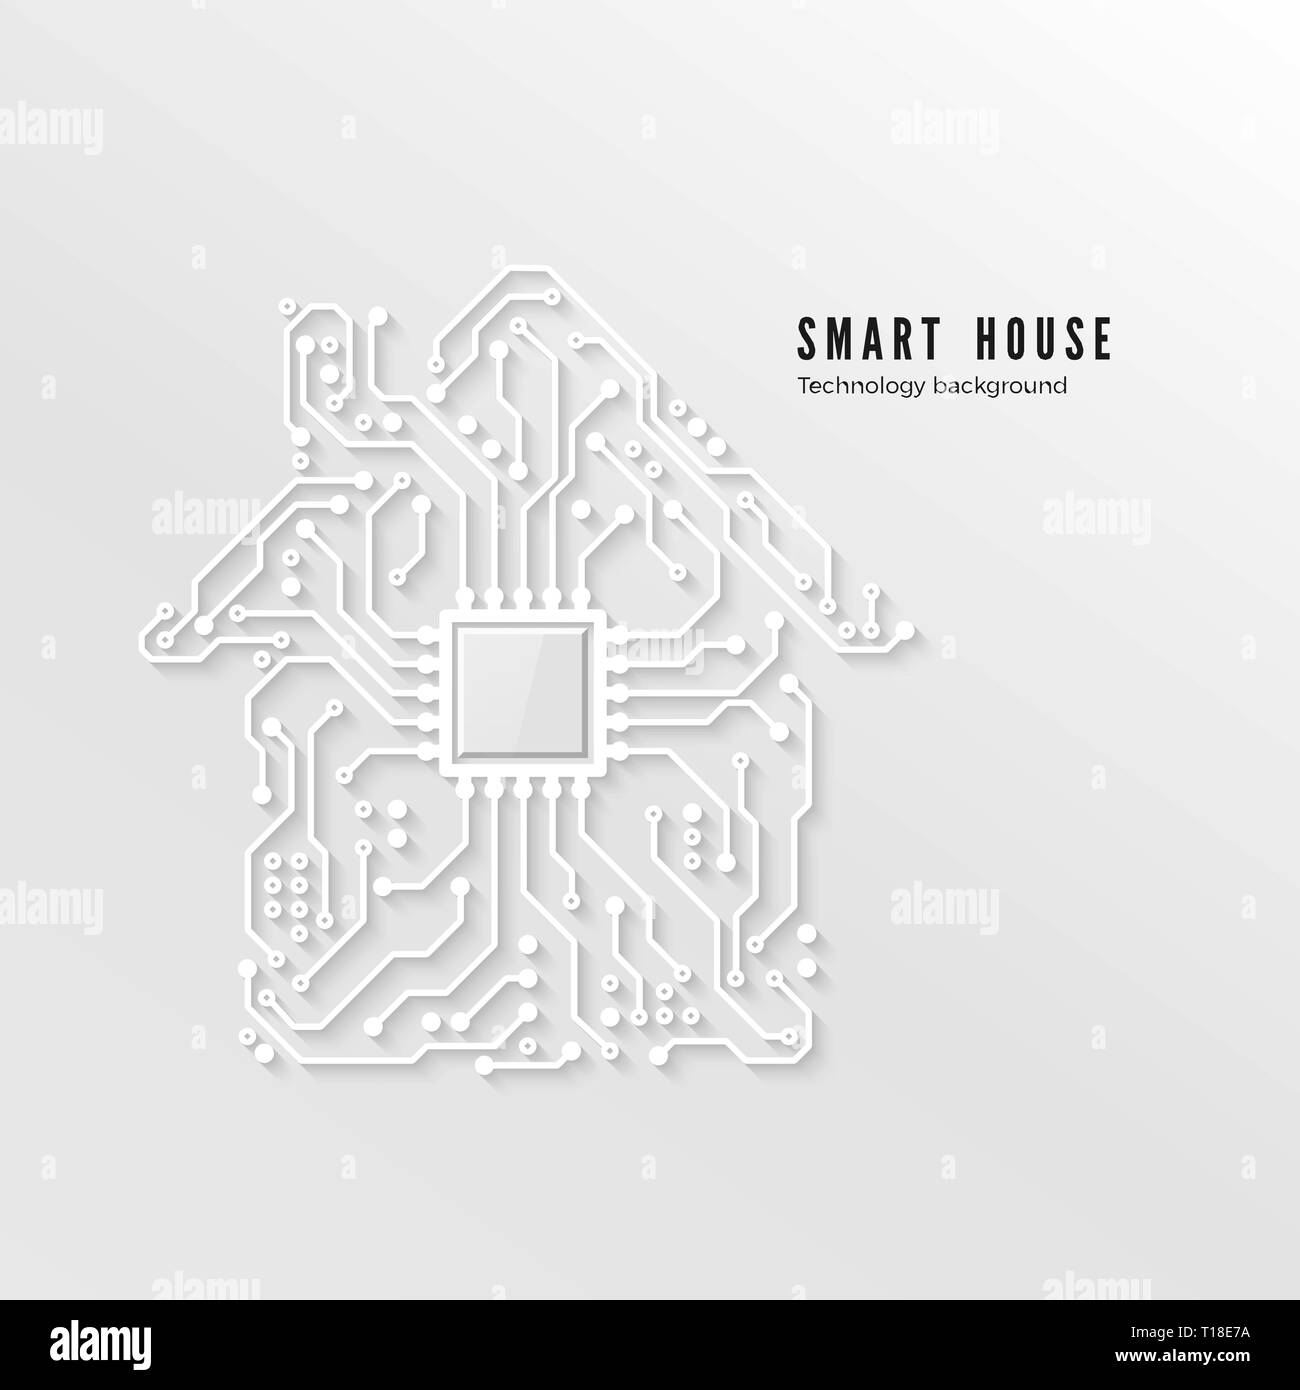 Smart home technology background. Smart house concept 3d paper circuit. Vector illustration Stock Vector